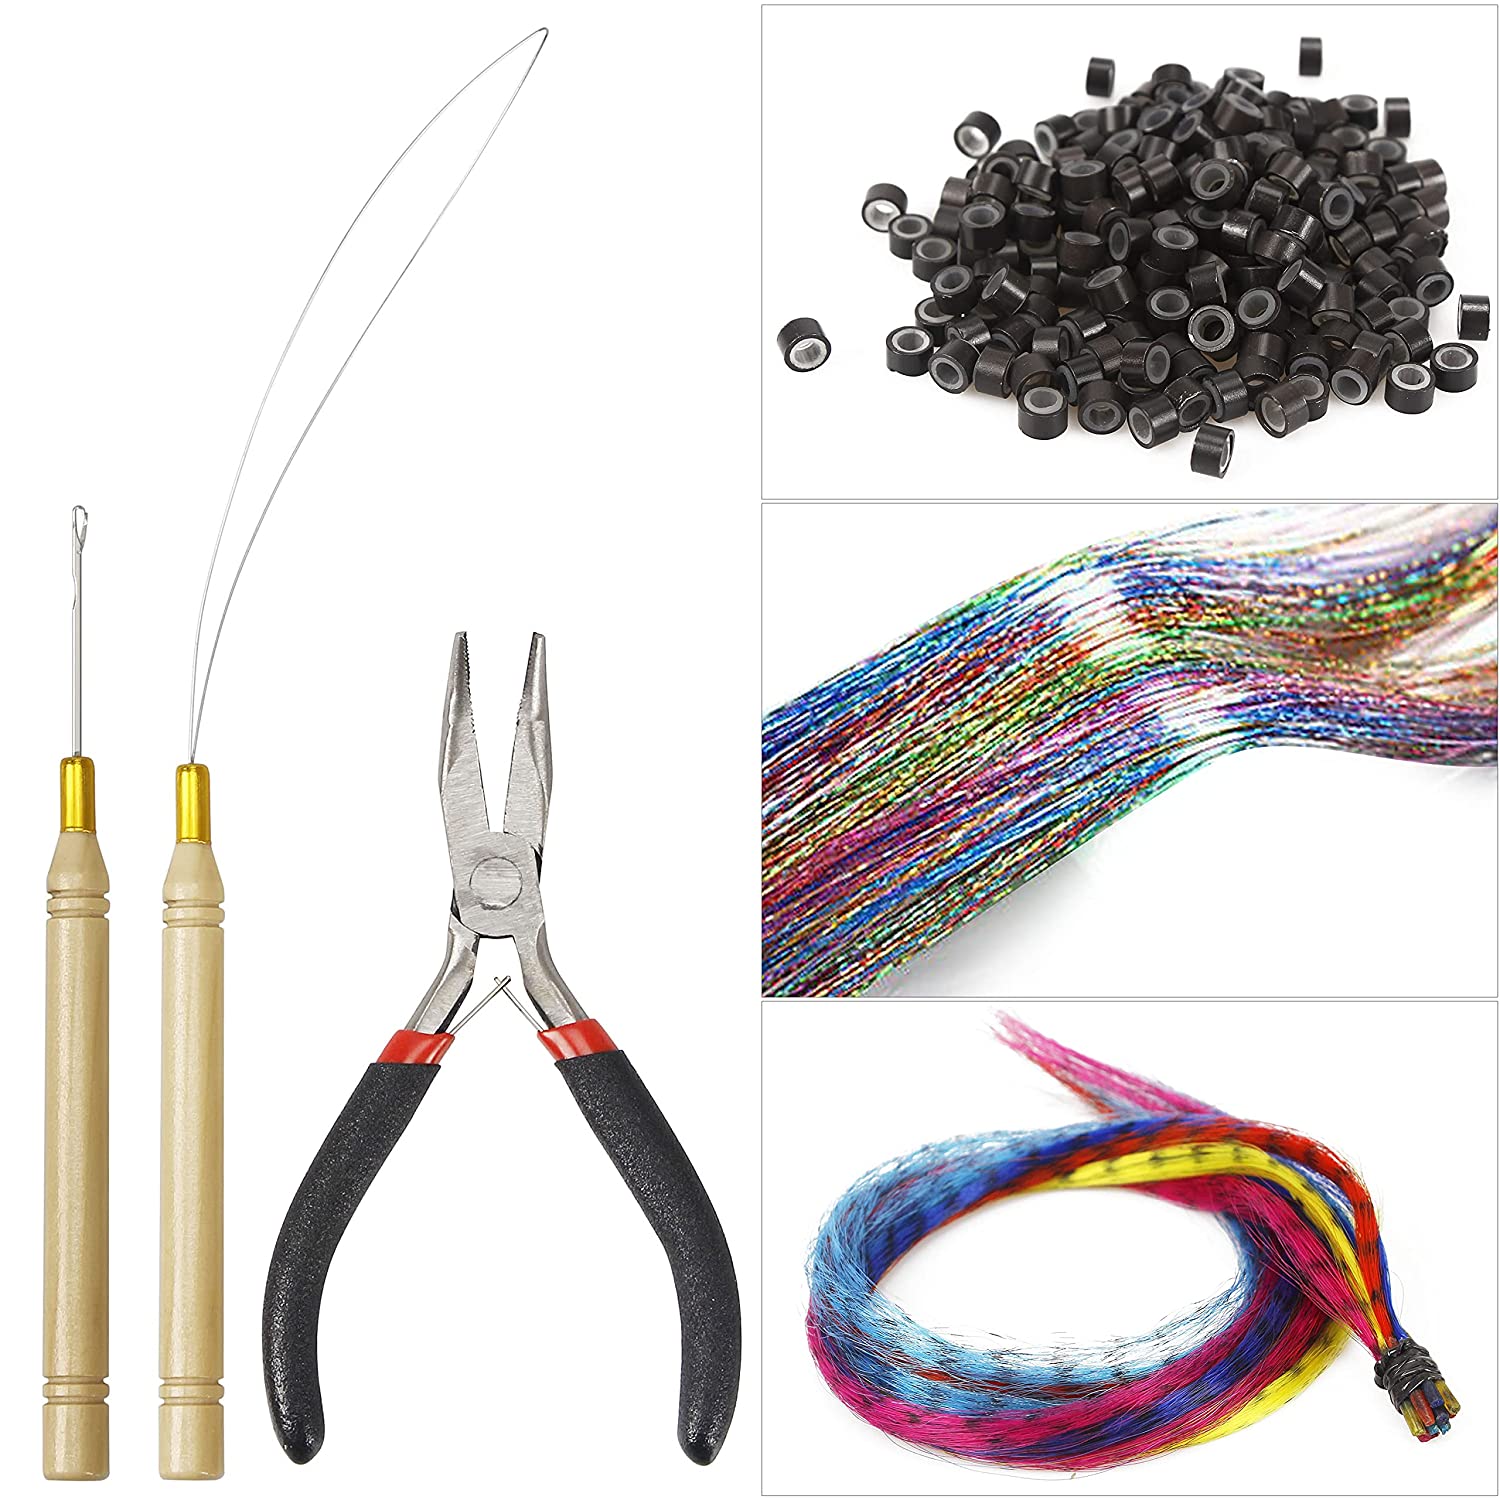 Microlink Pliers Hair Extension Tool Kit for Feathers Extensions